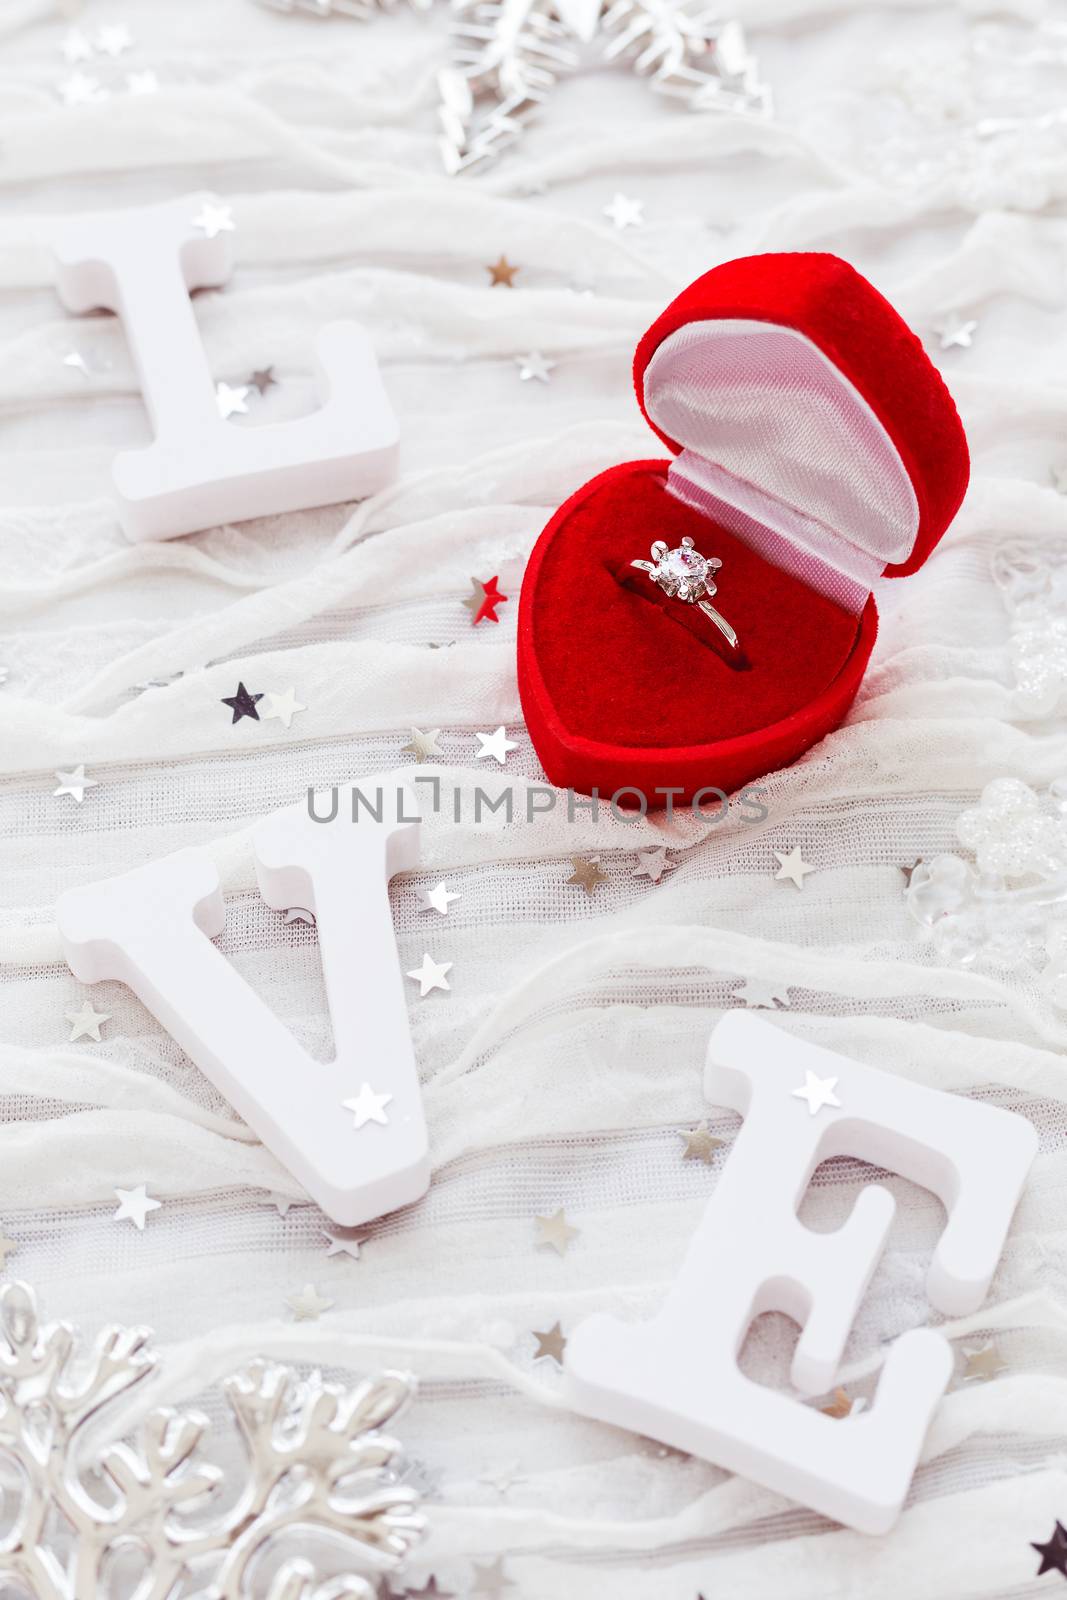 Word LOVE on white fabric background with engagement diamond ring in red gift box. Good for Valentine's day cards.